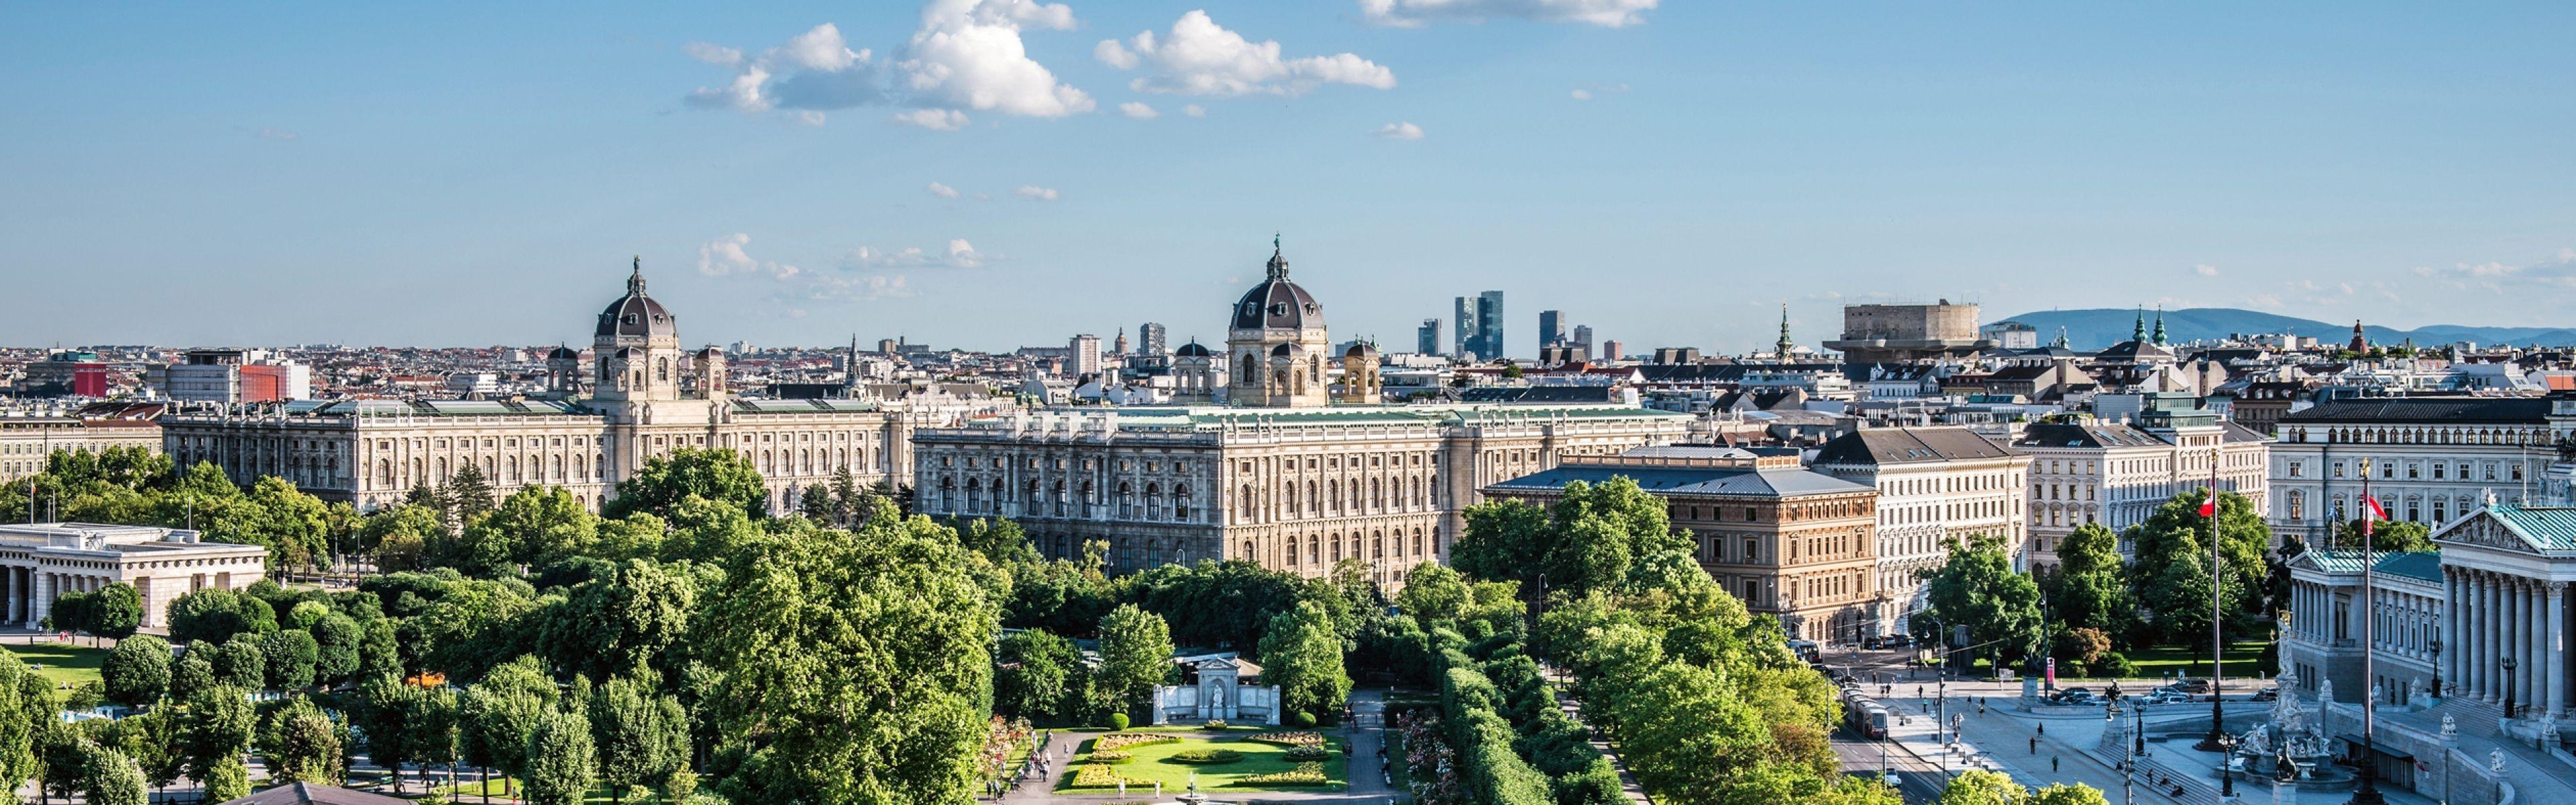 Vienna wallpapers, Vibrant city, Historical architecture, Cultural heritage, 3840x1200 Dual Screen Desktop